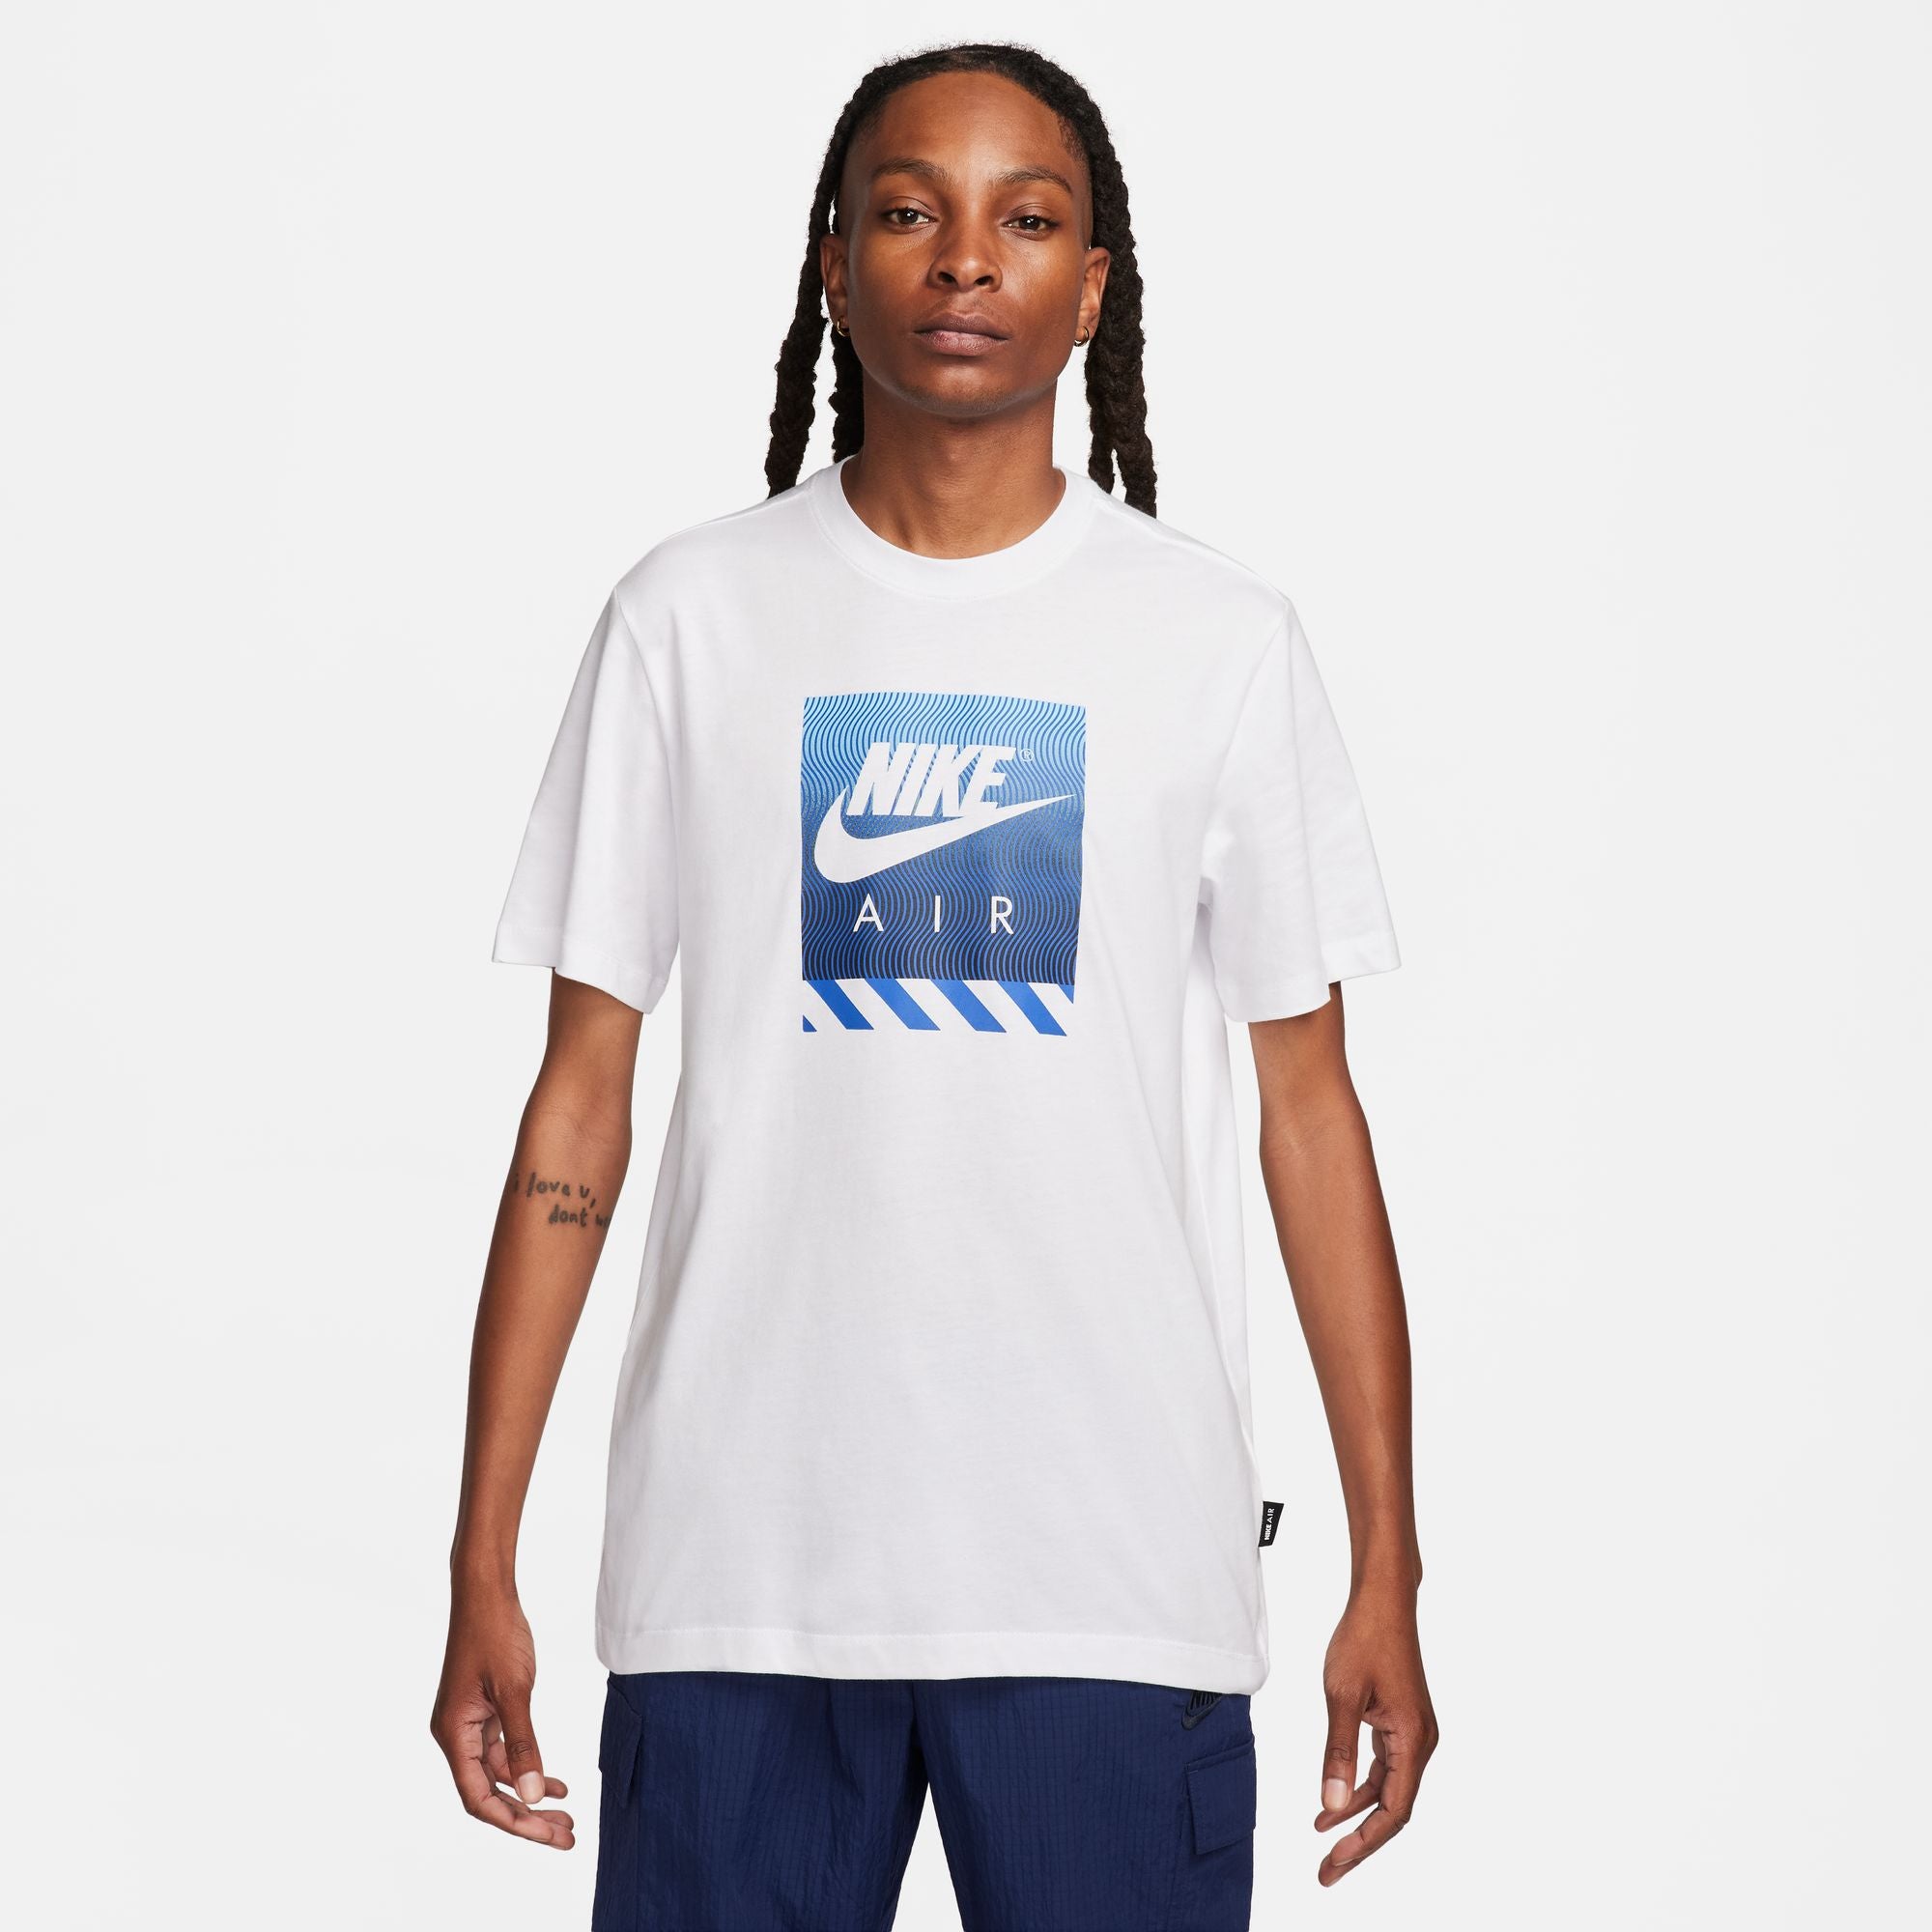 MENS NSW CONNECT T-SHIRT (WHITE)